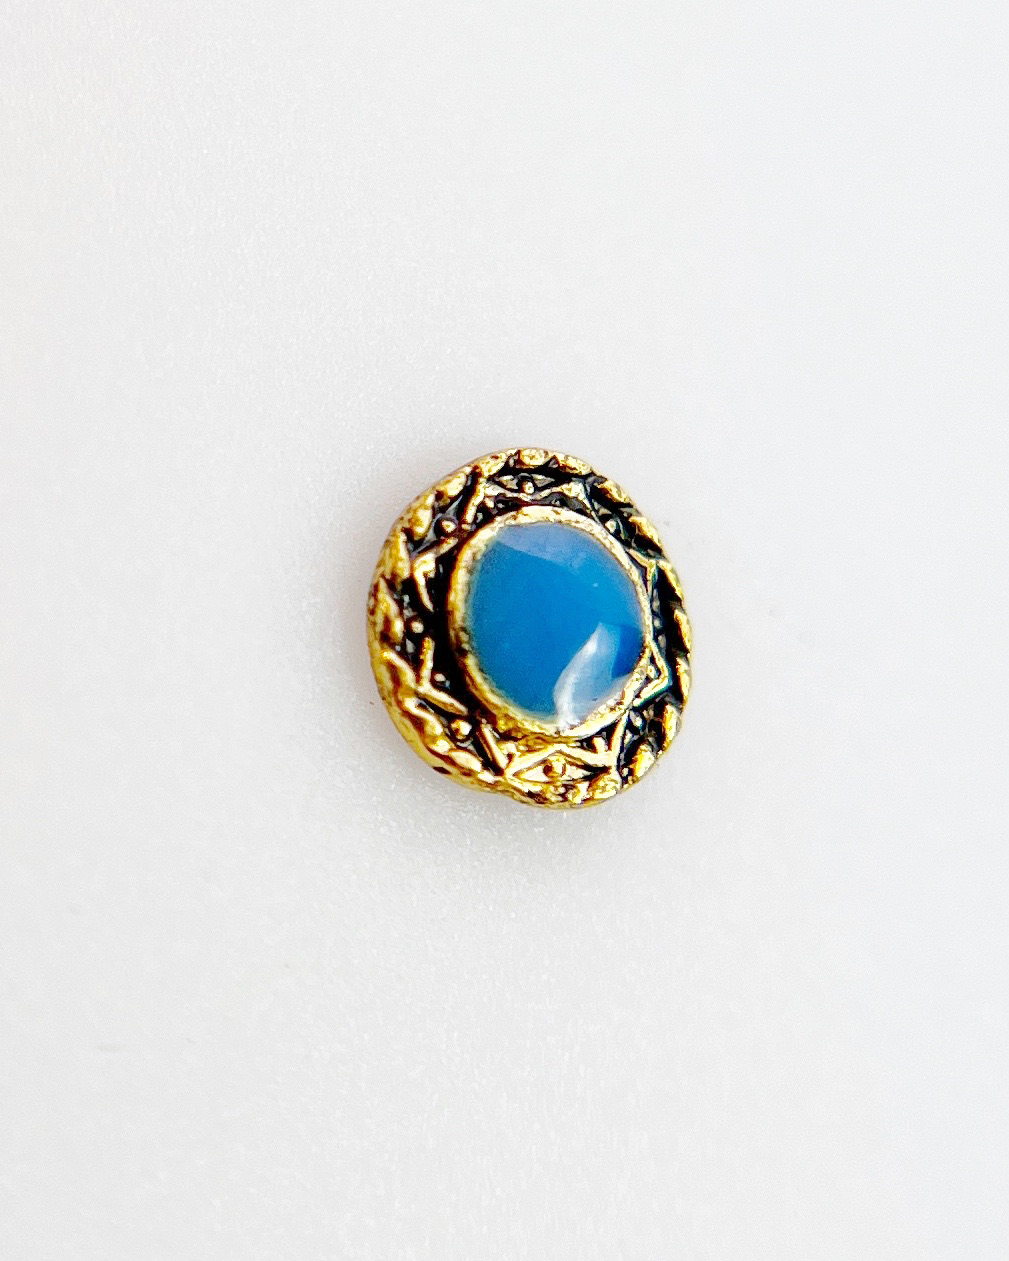 Gold and blue round charm on white background. 